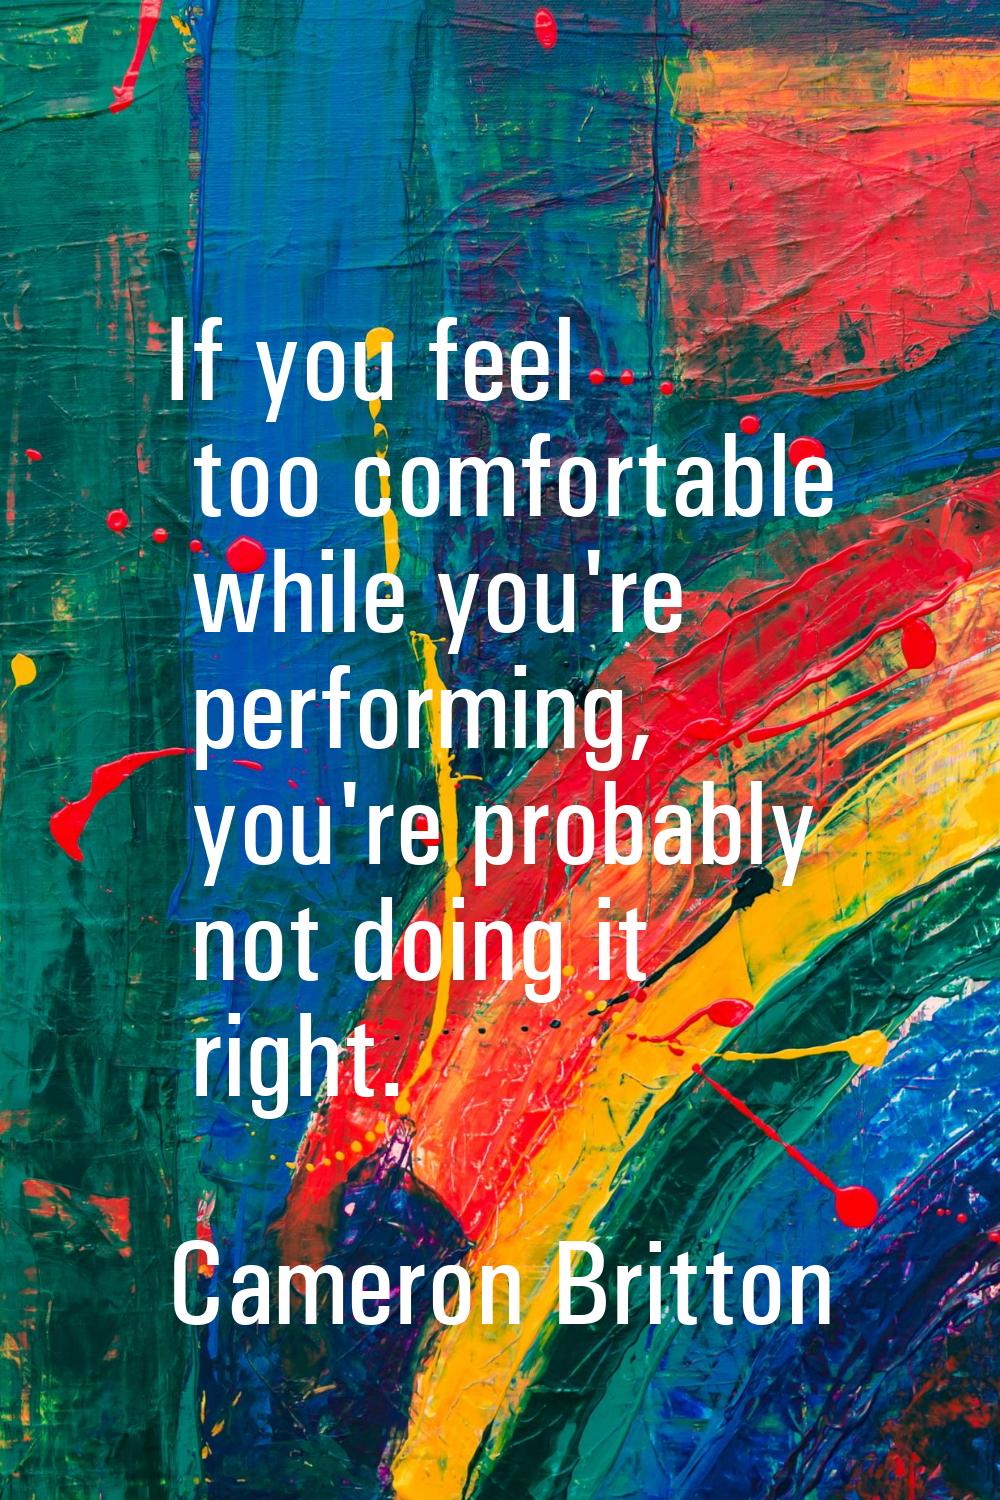 If you feel too comfortable while you're performing, you're probably not doing it right.